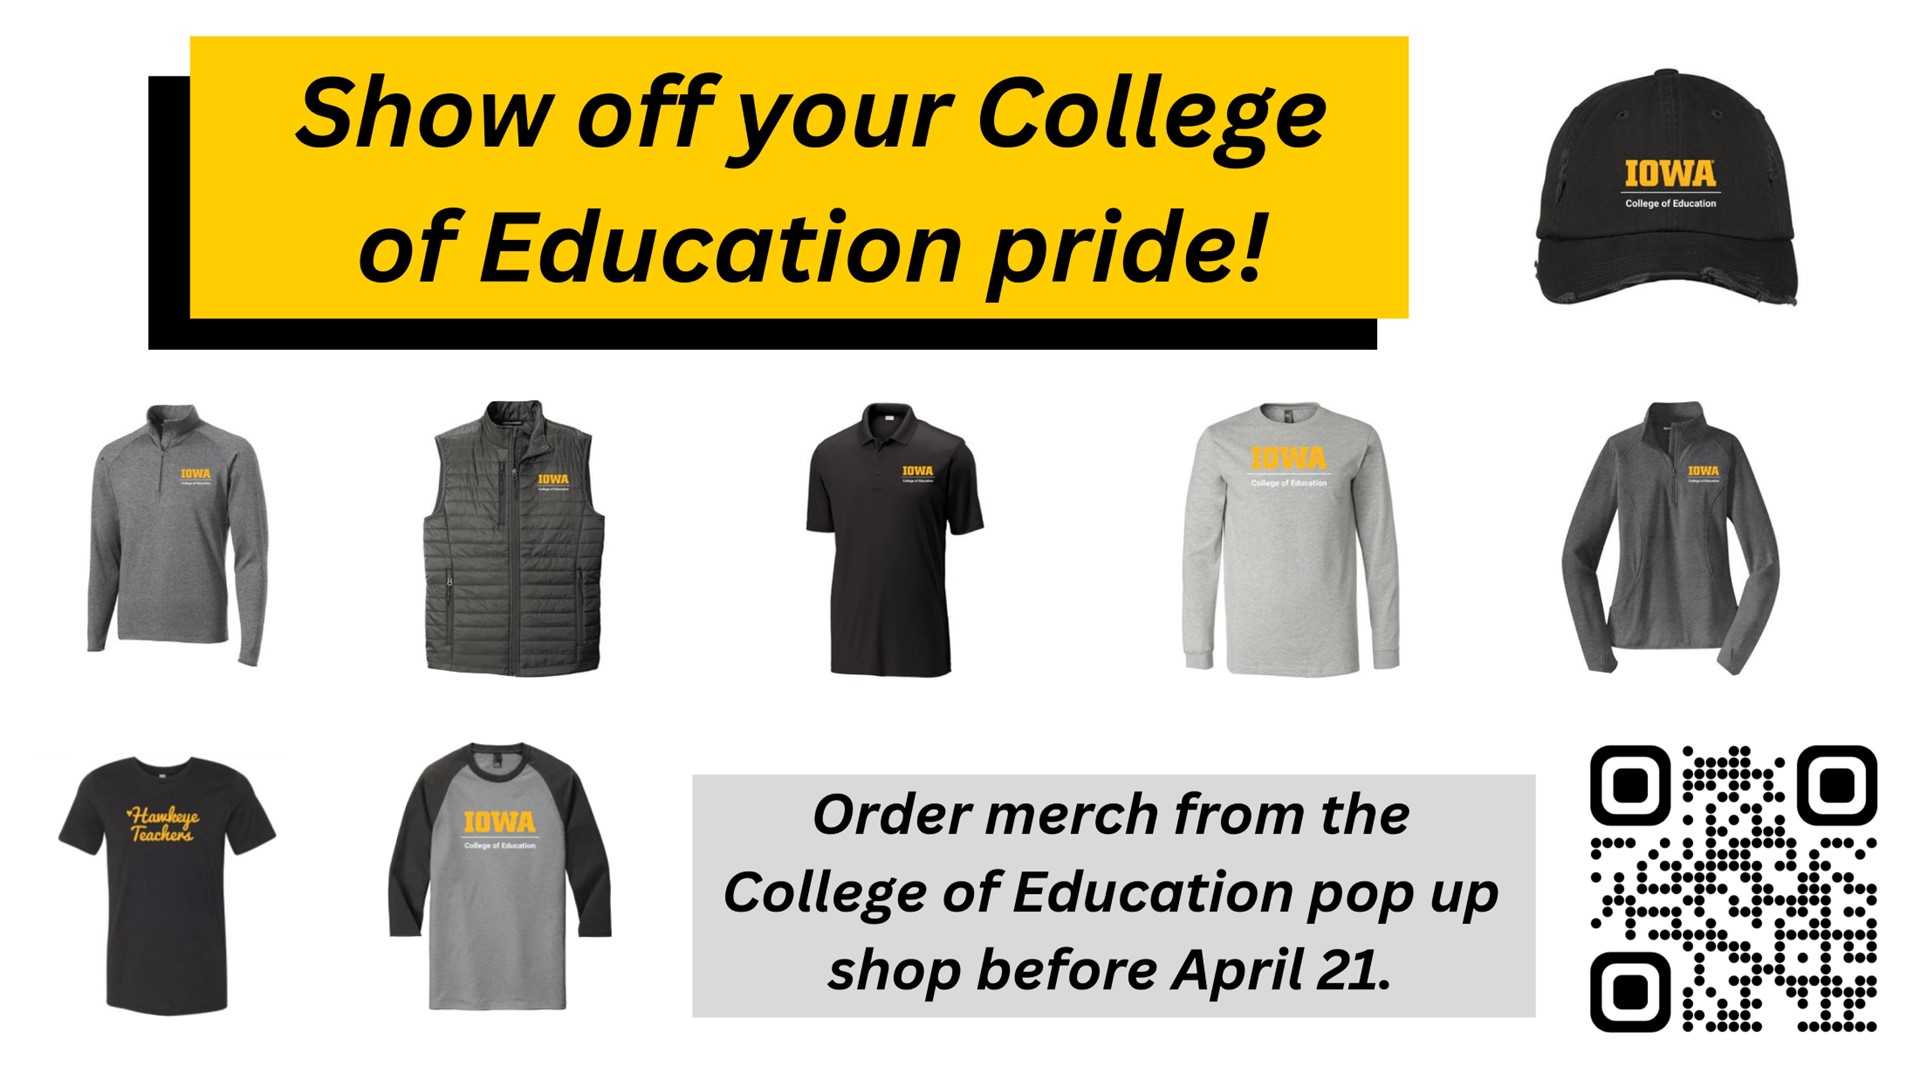 Order merch from College of Education pop up shop before 4/21.